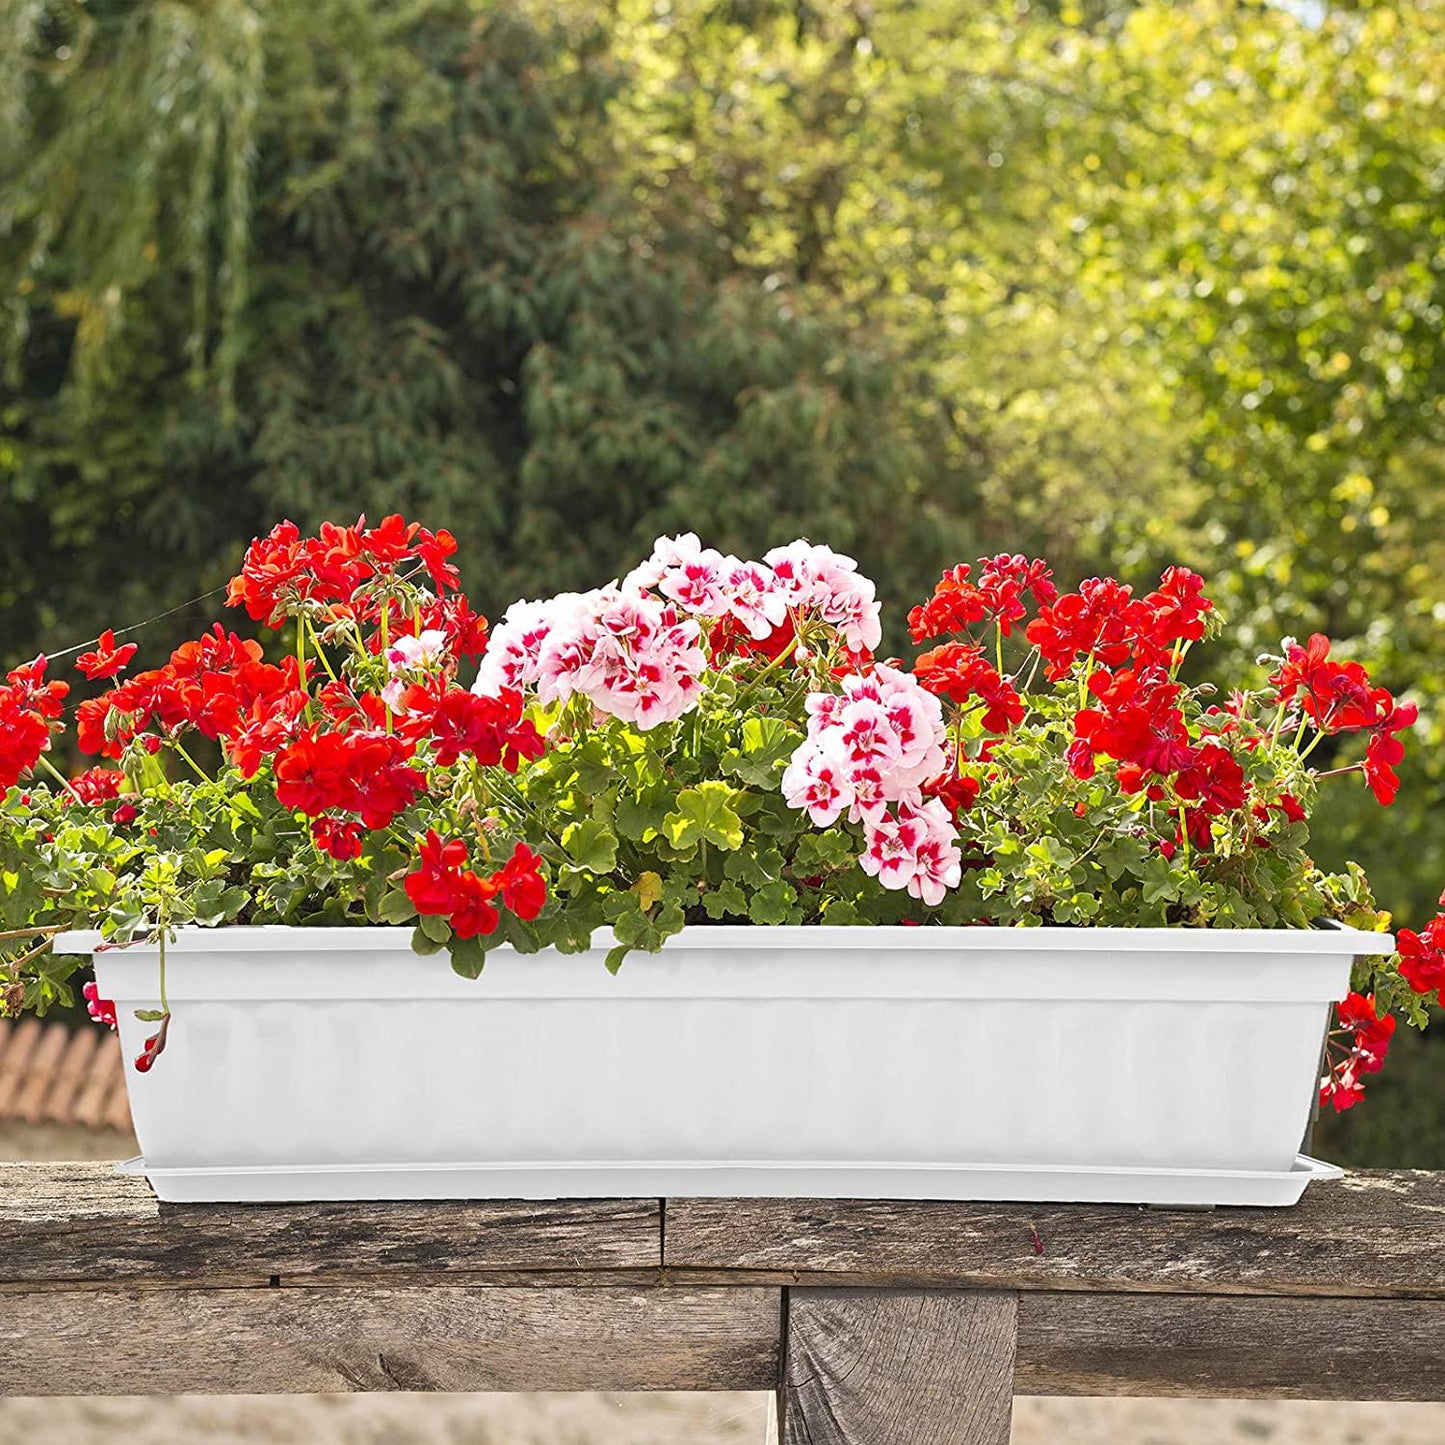 ELCOHO 3 Pack Flower Window Box Planters 17 Inches Plastic Vegetable Plant Pot Rectangular Planters with Trays for Windowsill, Patio, Porch, Garden, Home Decor (White)